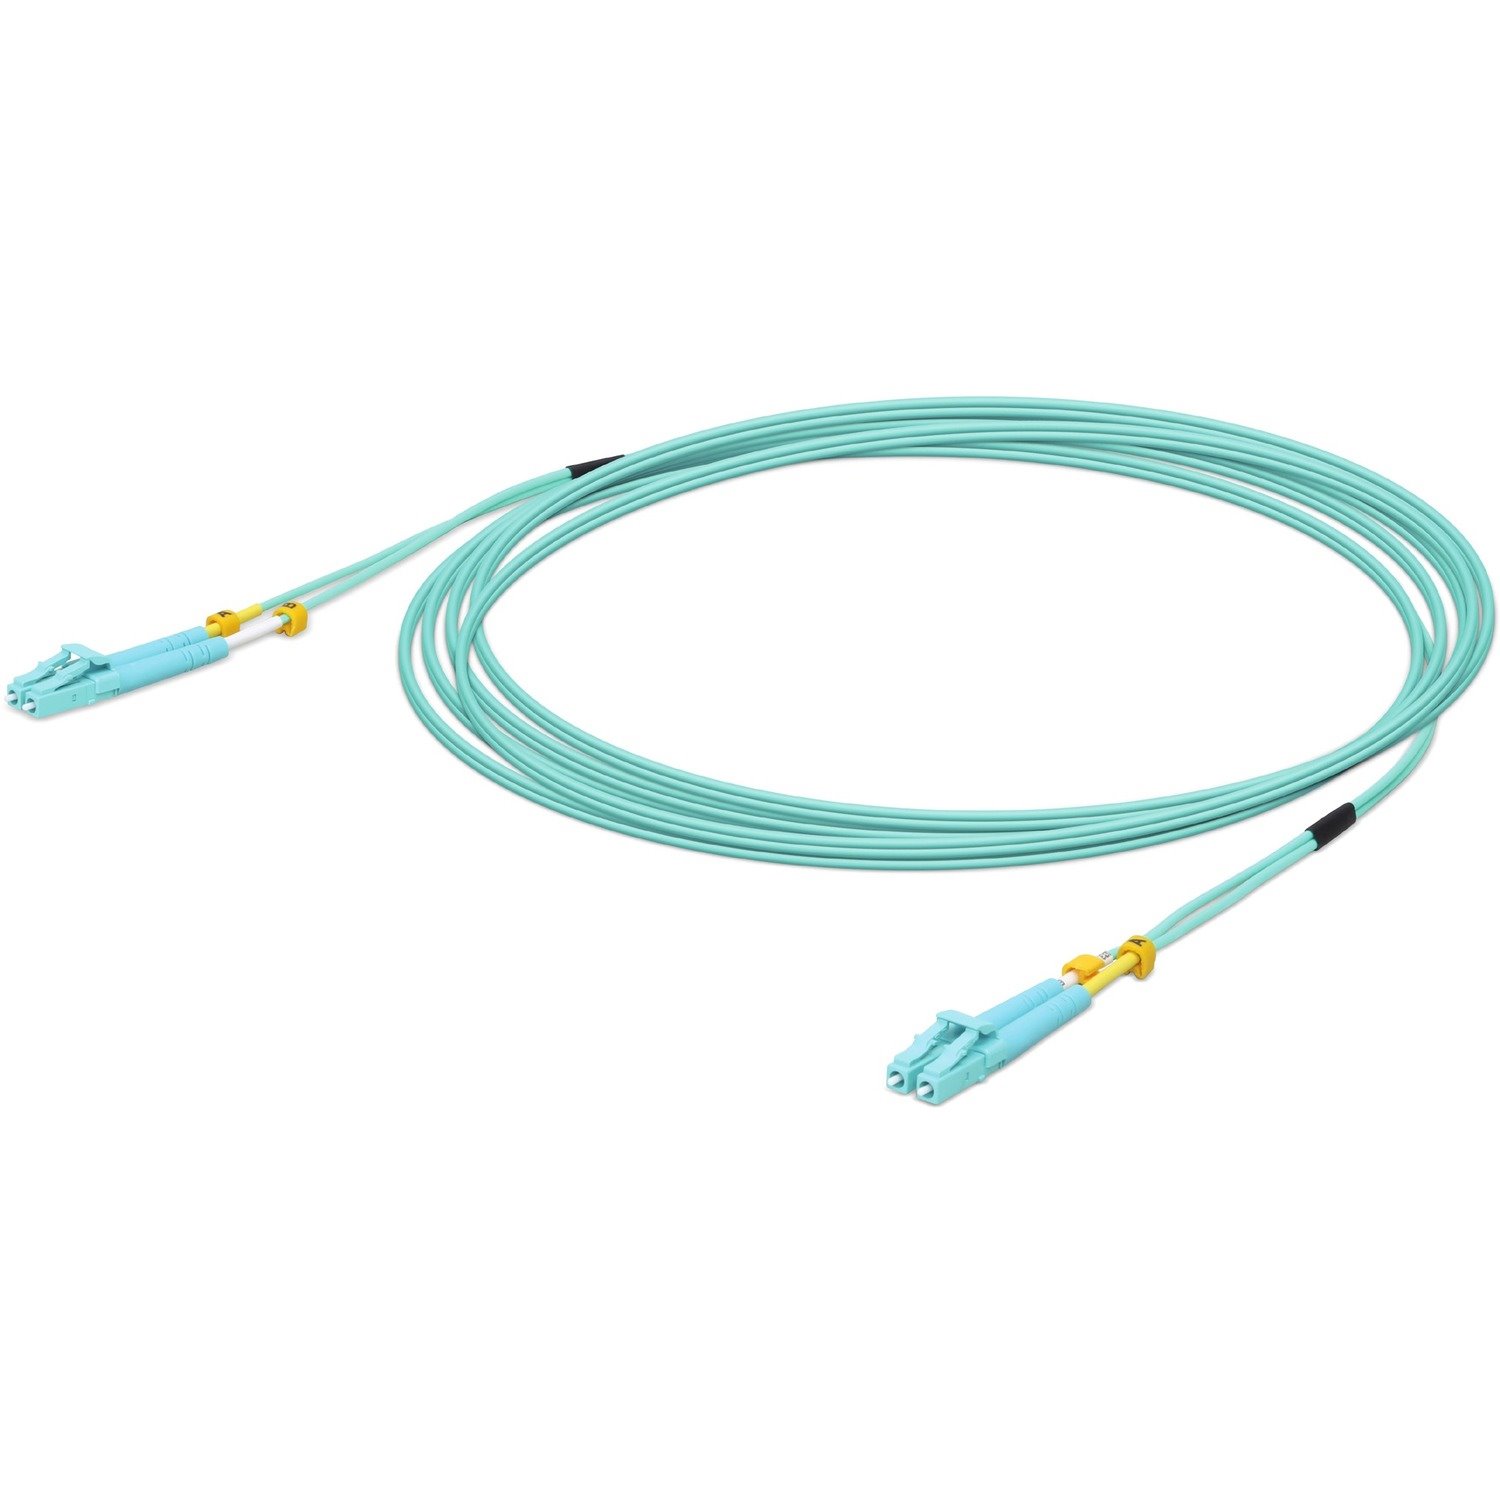 Ubiquiti 2 m Fibre Optic Network Cable for Network Device